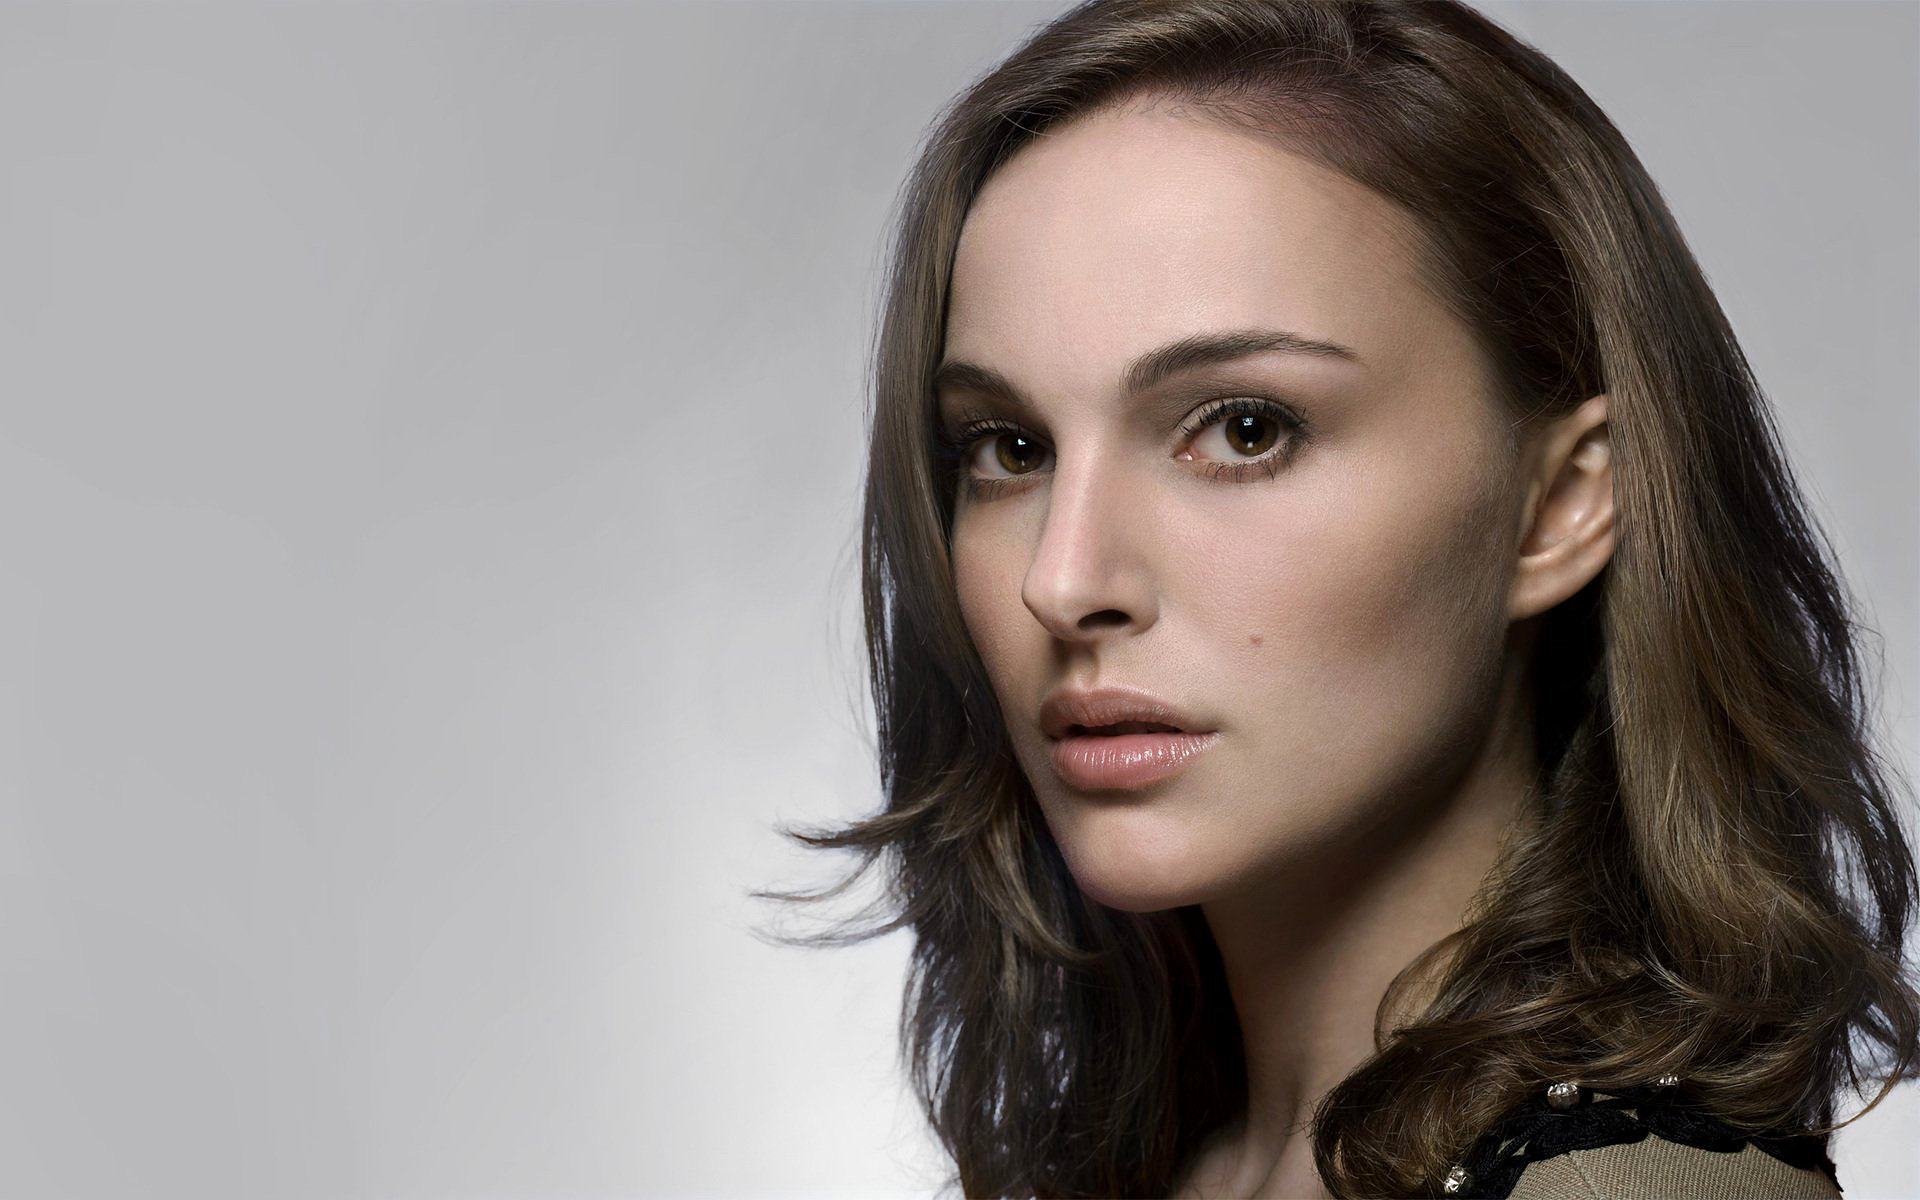 Natalie Portman Wallpapers High Resolution and Quality